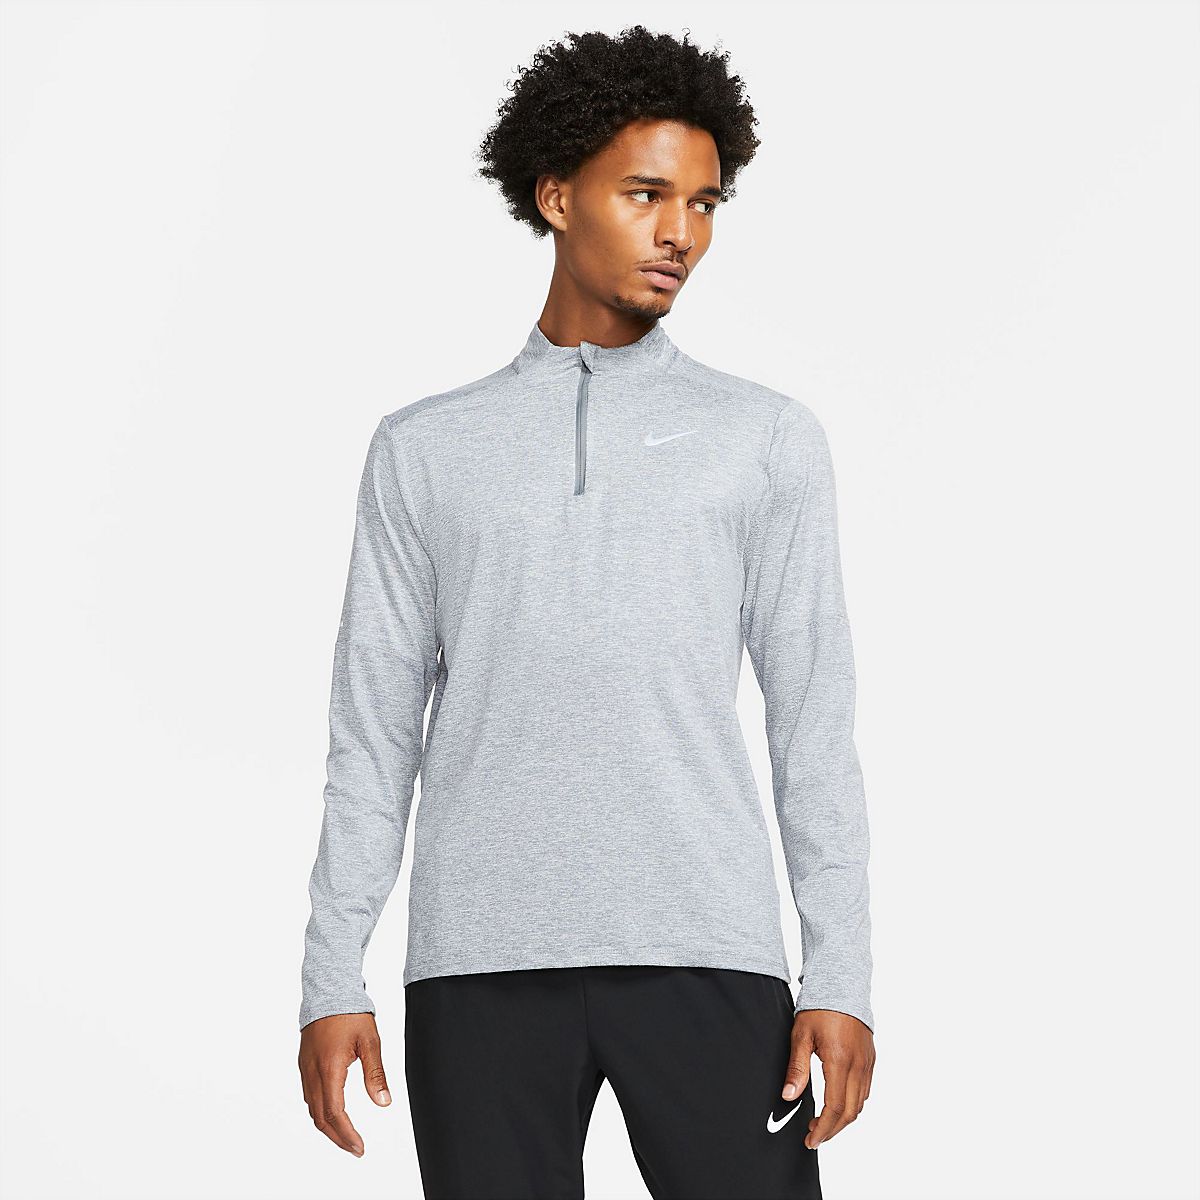 Nike Men's Dri-FIT Element 1/4 Zip Top | Free Shipping at Academy